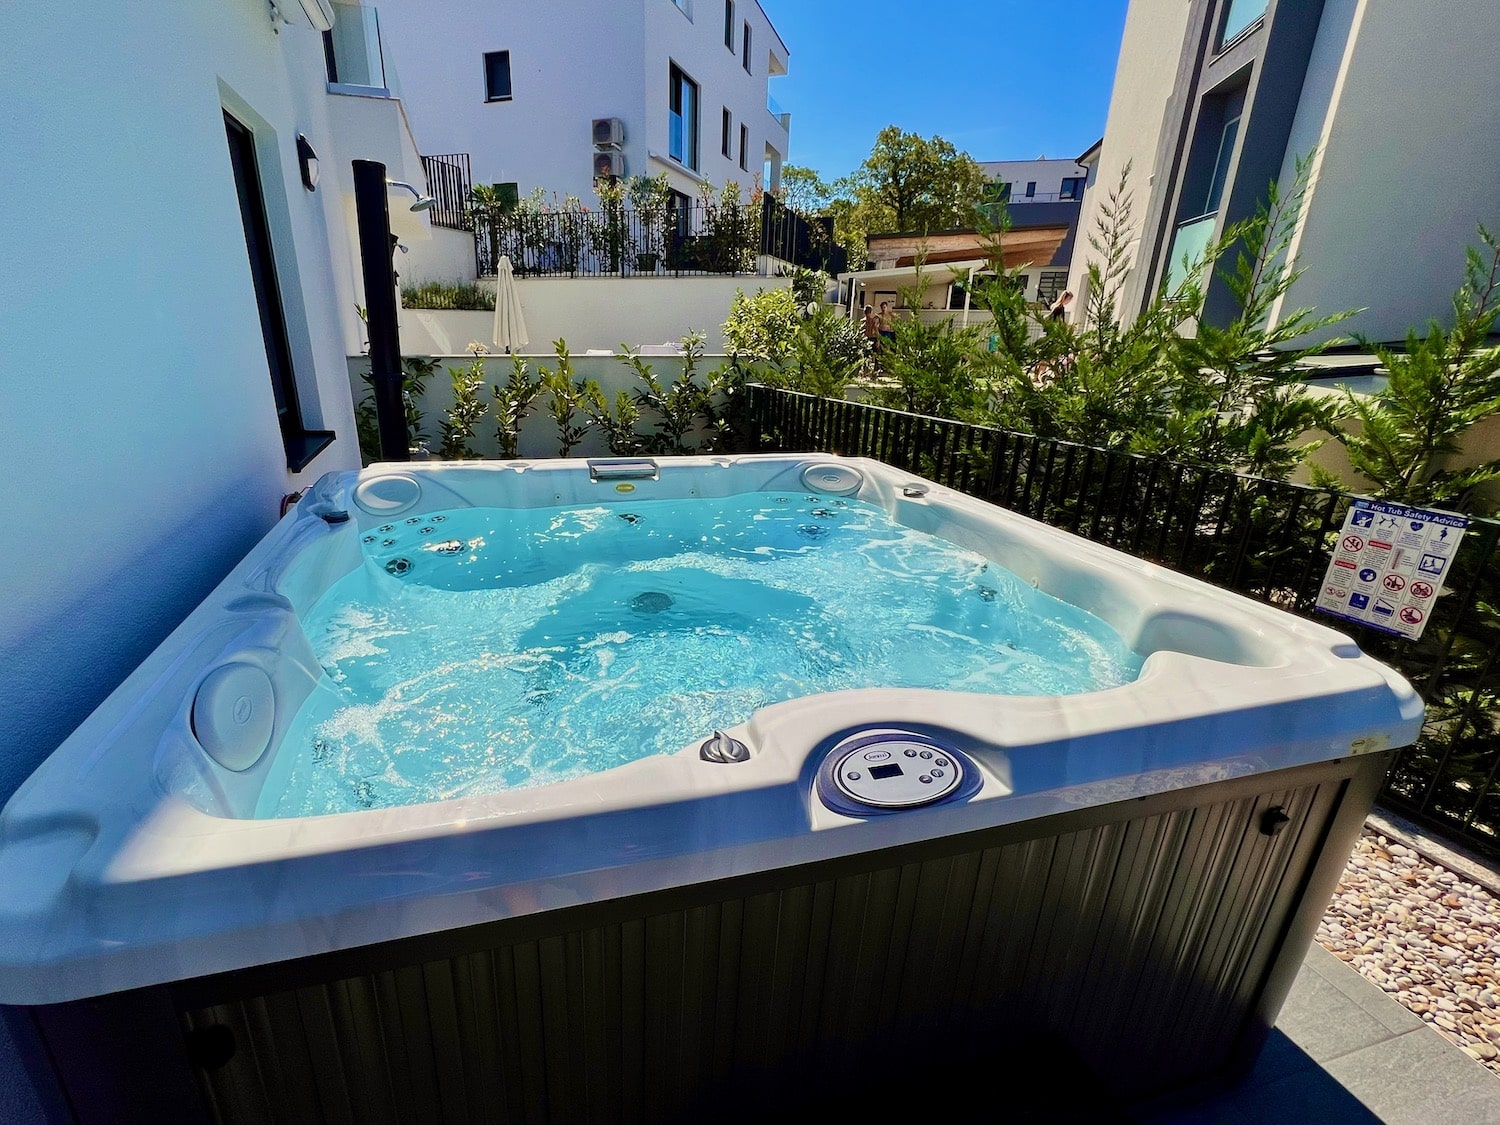 Many of the accommodations are equipped with every imaginable facility. Photo: Sascha Tegtmeyer Sol Villas Sol Tours Krk Experiences Reviews Reviews